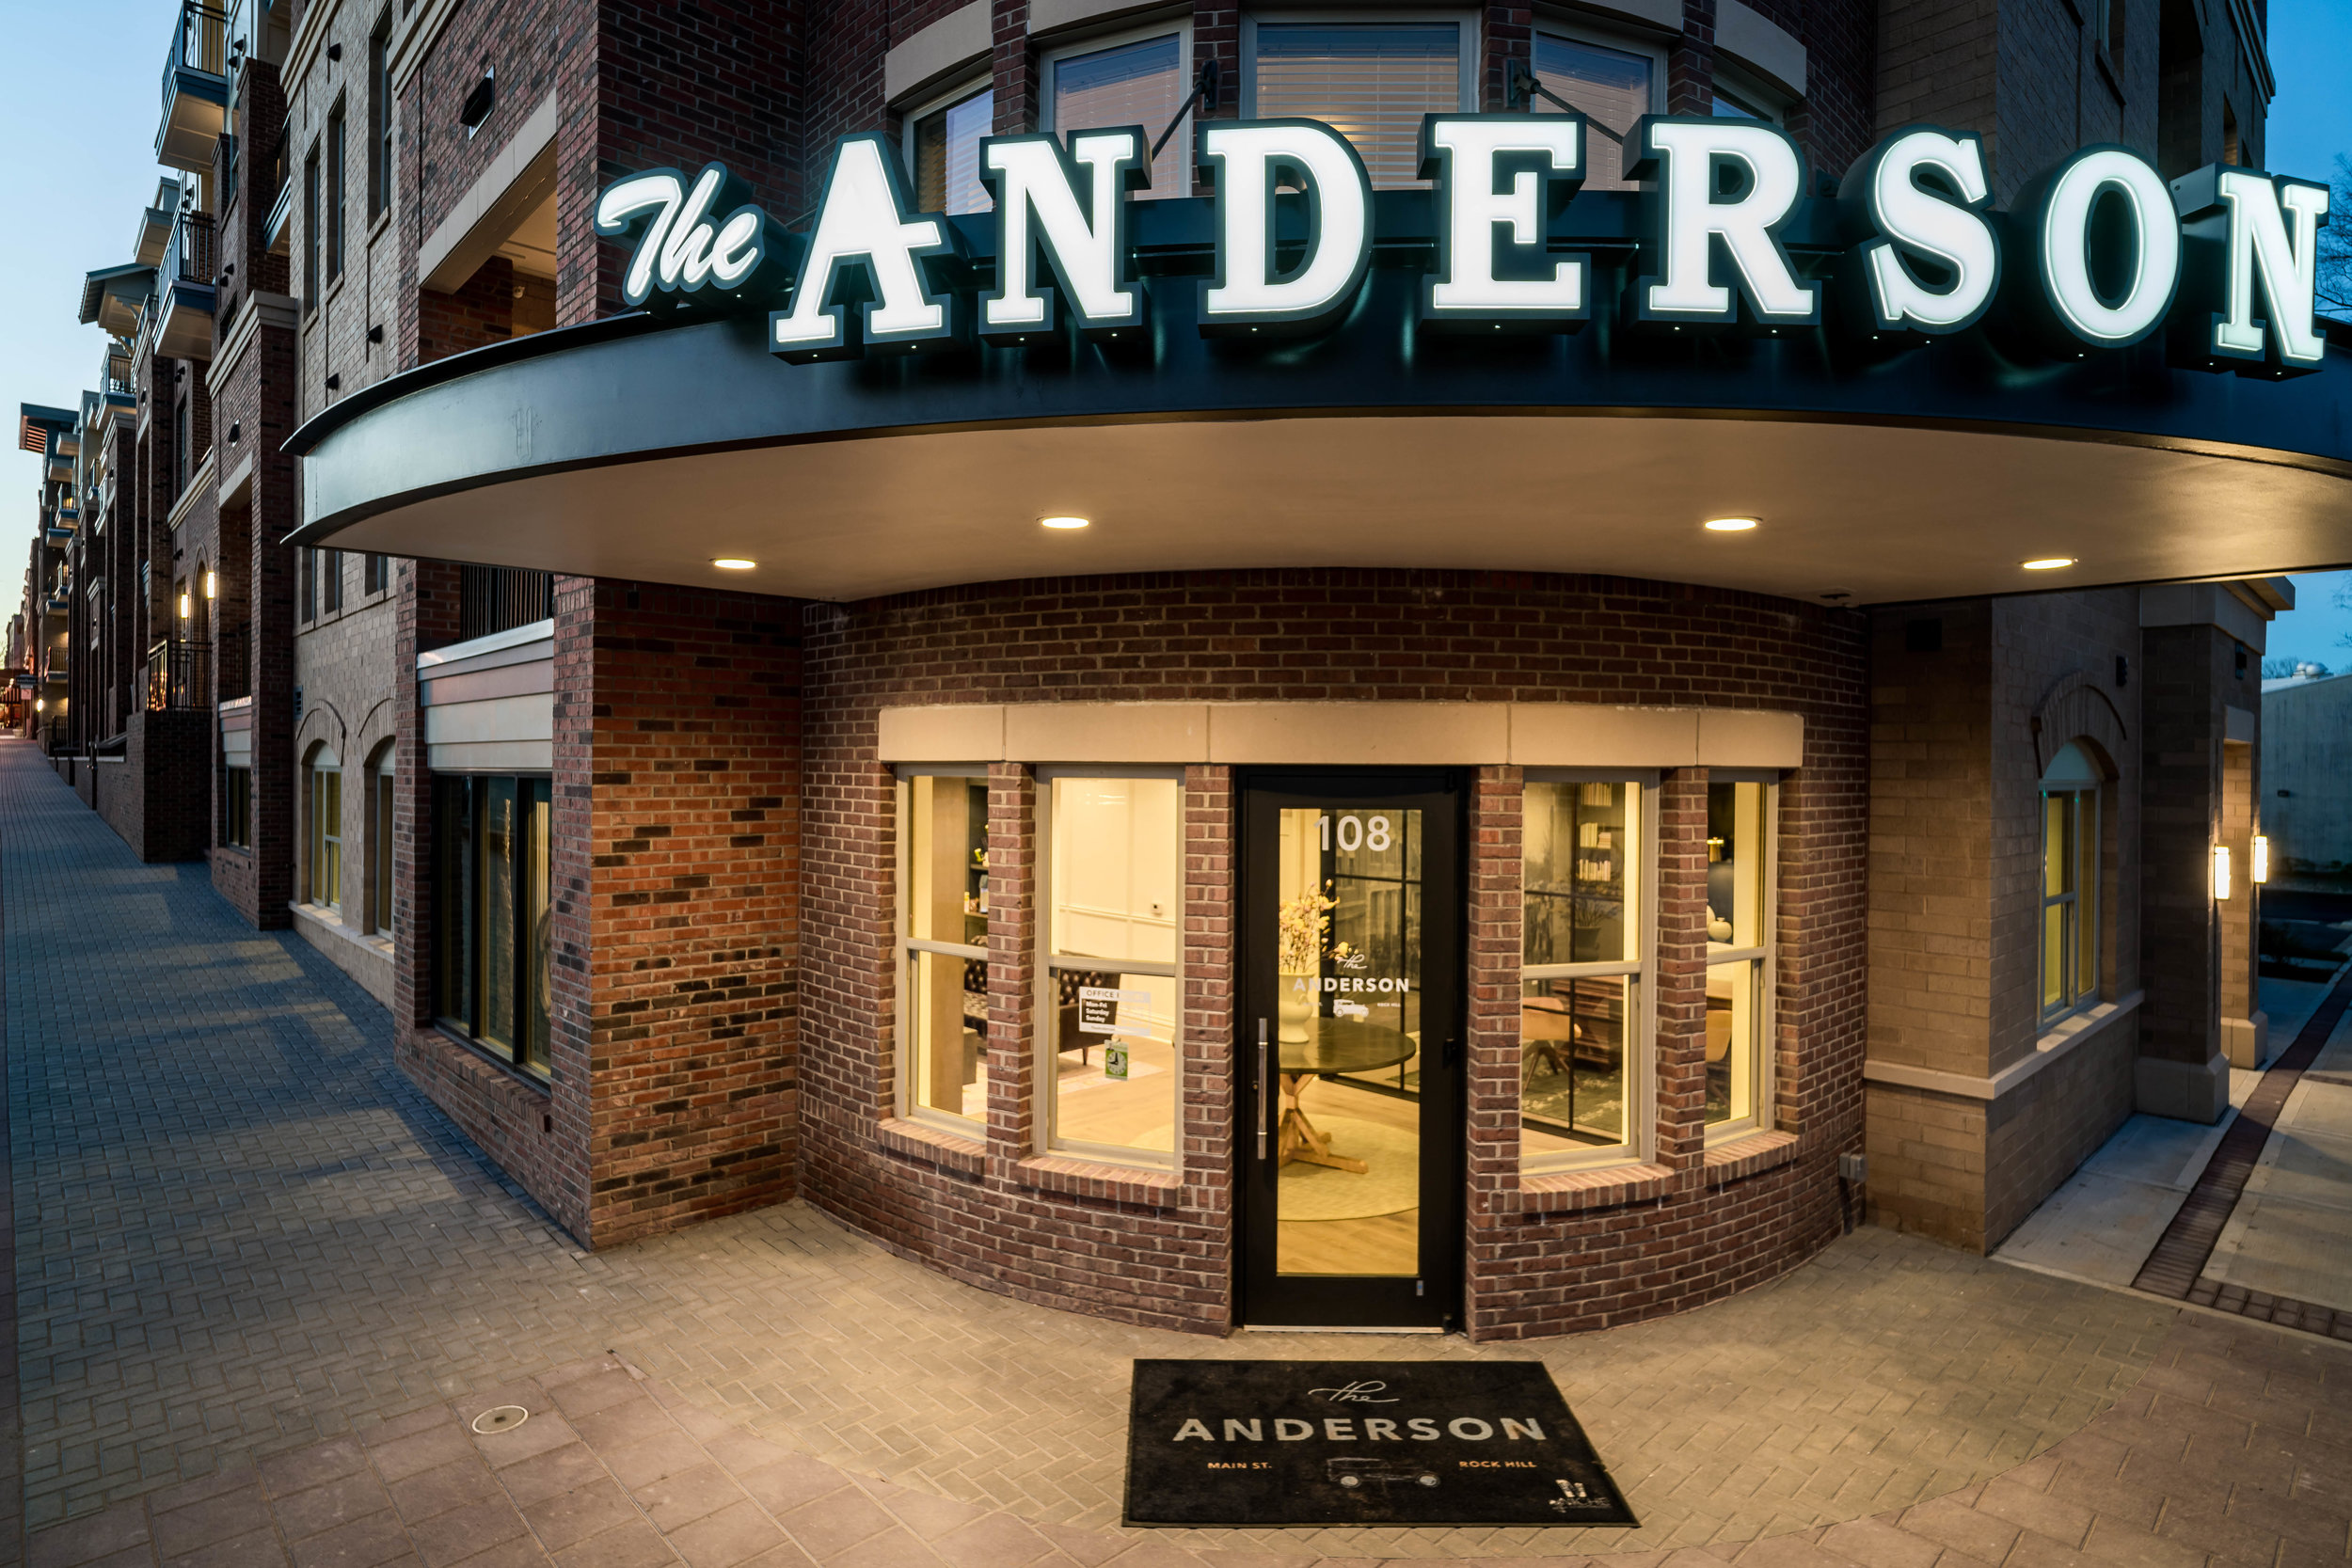 The Anderson-156.jpg